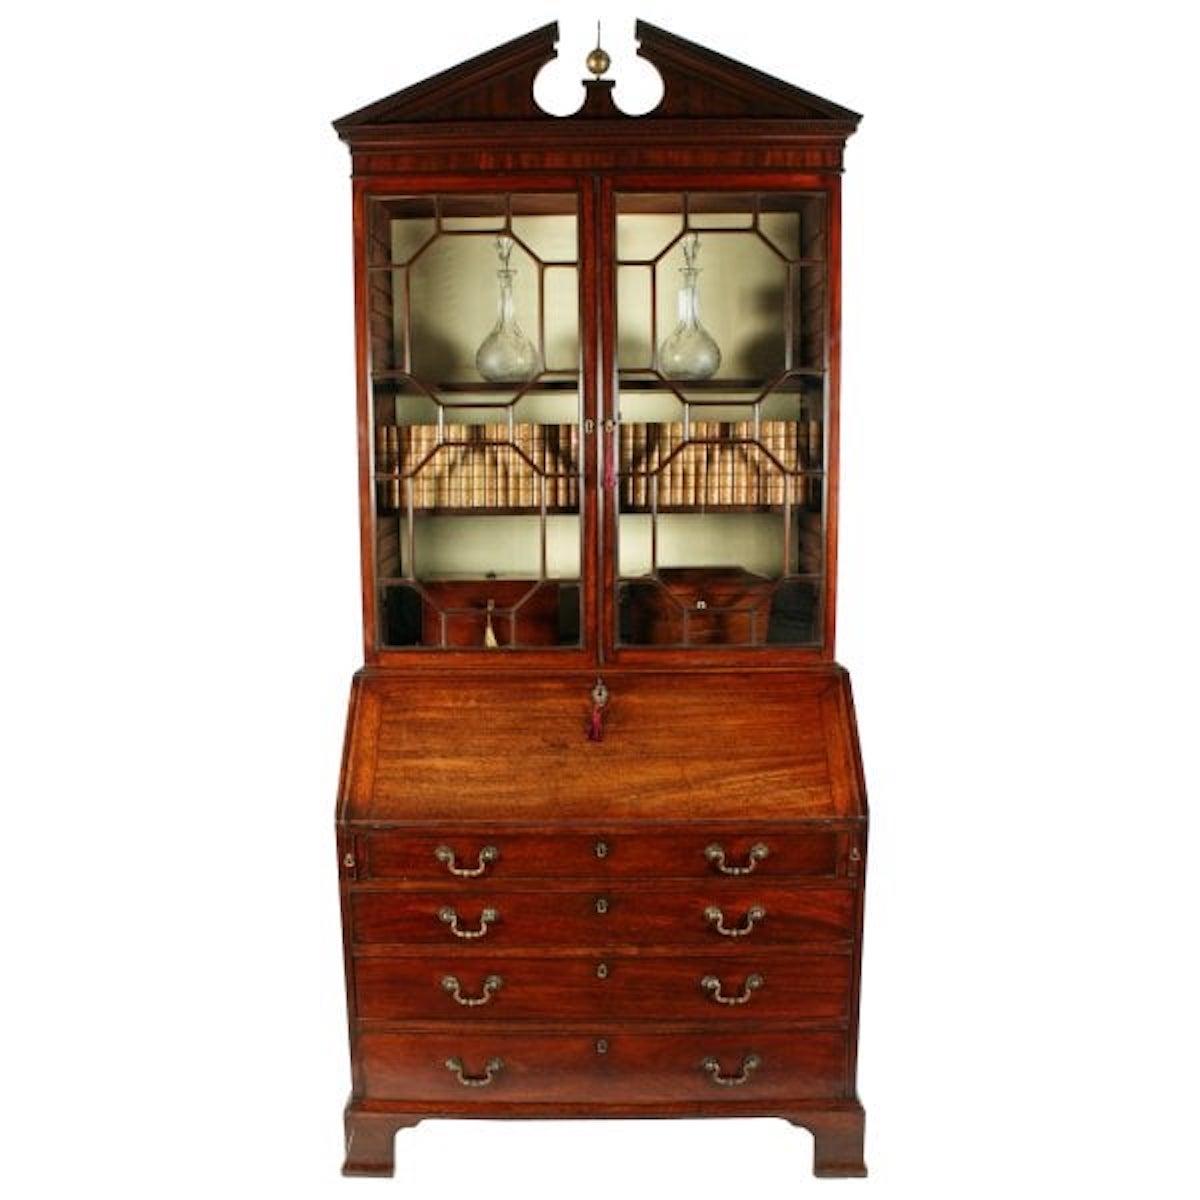 Georgian Mahogany Bureau bookcase

A late 18th century George III mahogany bureau bookcase.

The bookcase has a glazed two door top with 15 panes of glass in each door and an architectural pediment.

The glazed bookcase has two slide out